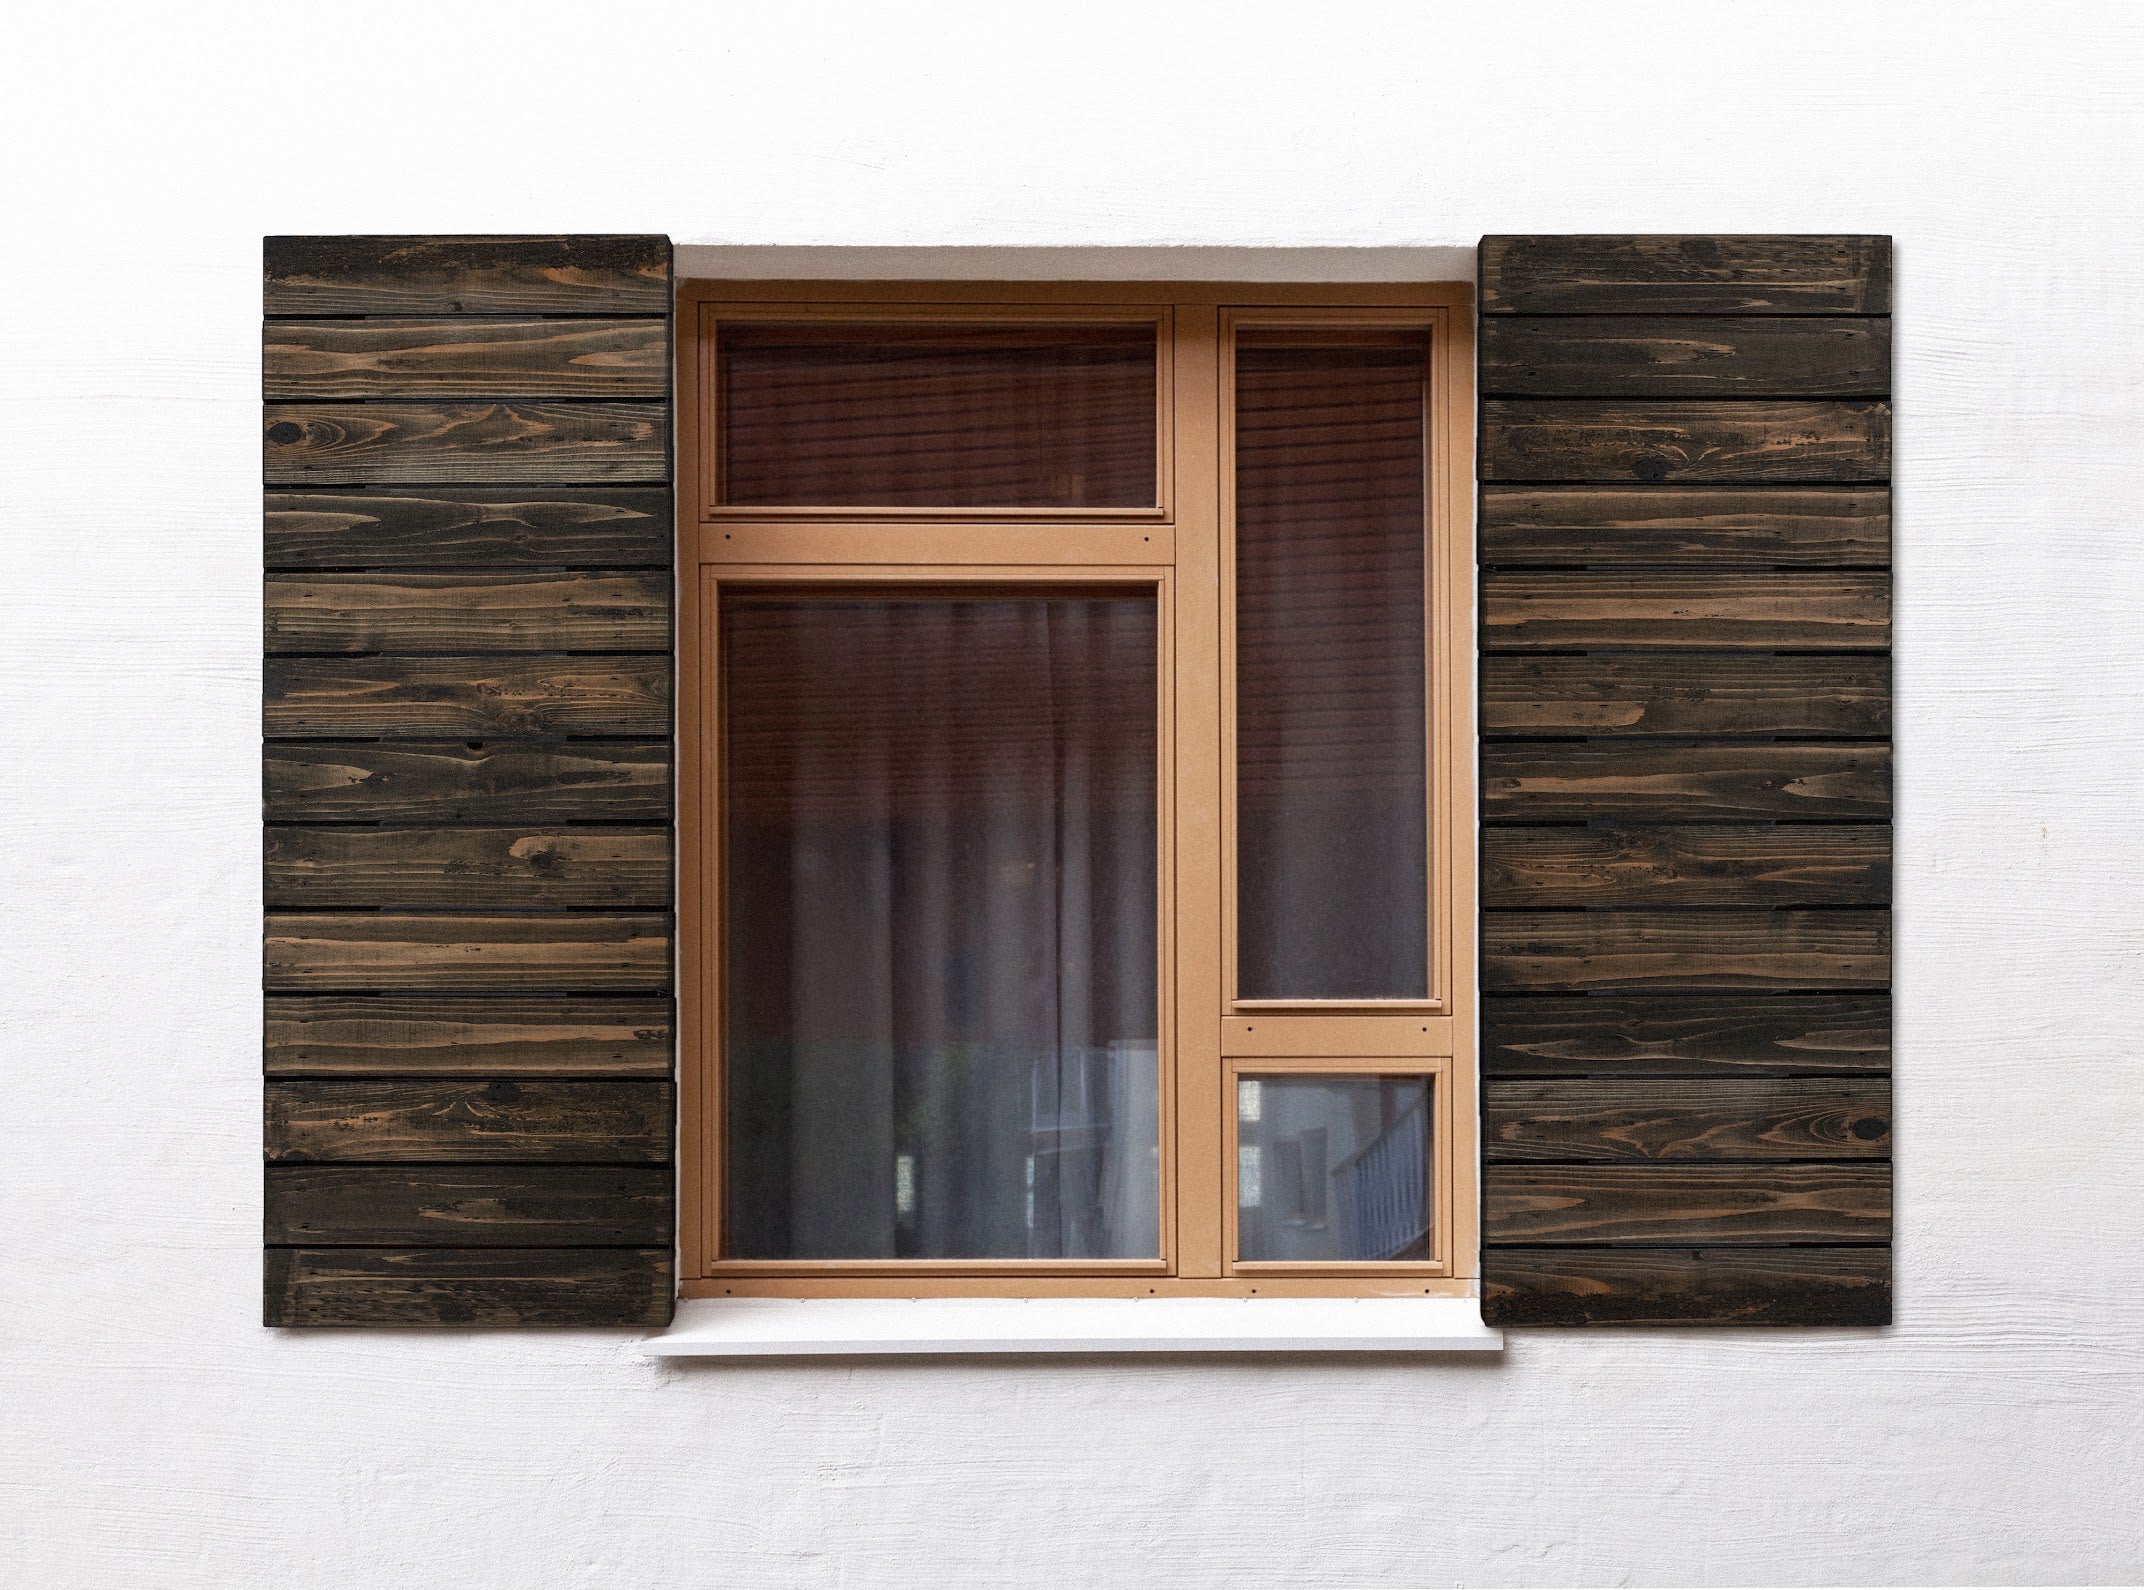 Dogberry Collections Real Wood Shutters Create a Custom Look with Easy Installation